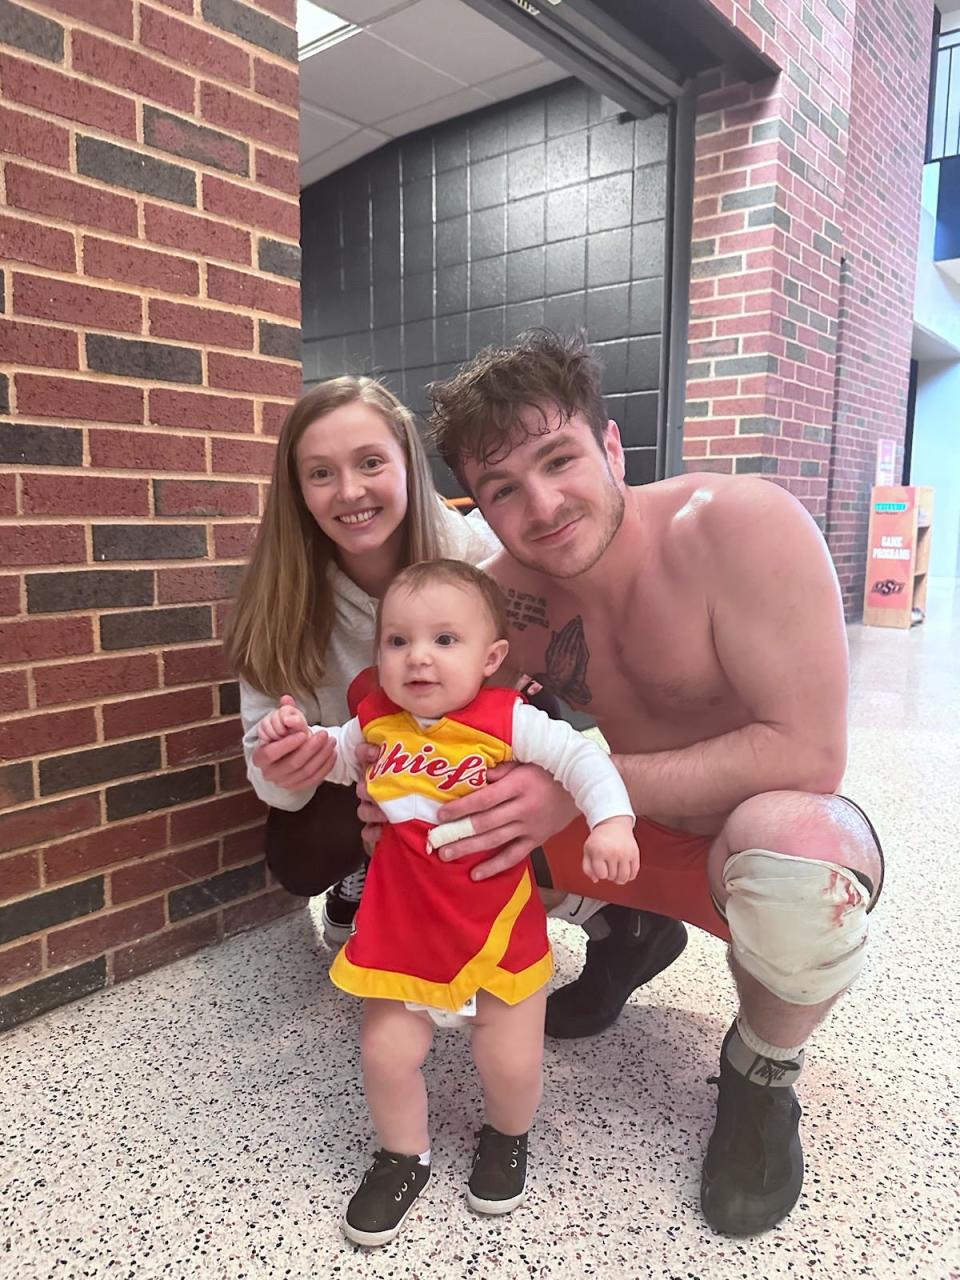 Oklahoma State wrestler Kaden Gfeller, right, with his fiance, Cassidy Watters, and daughter Charlotte.